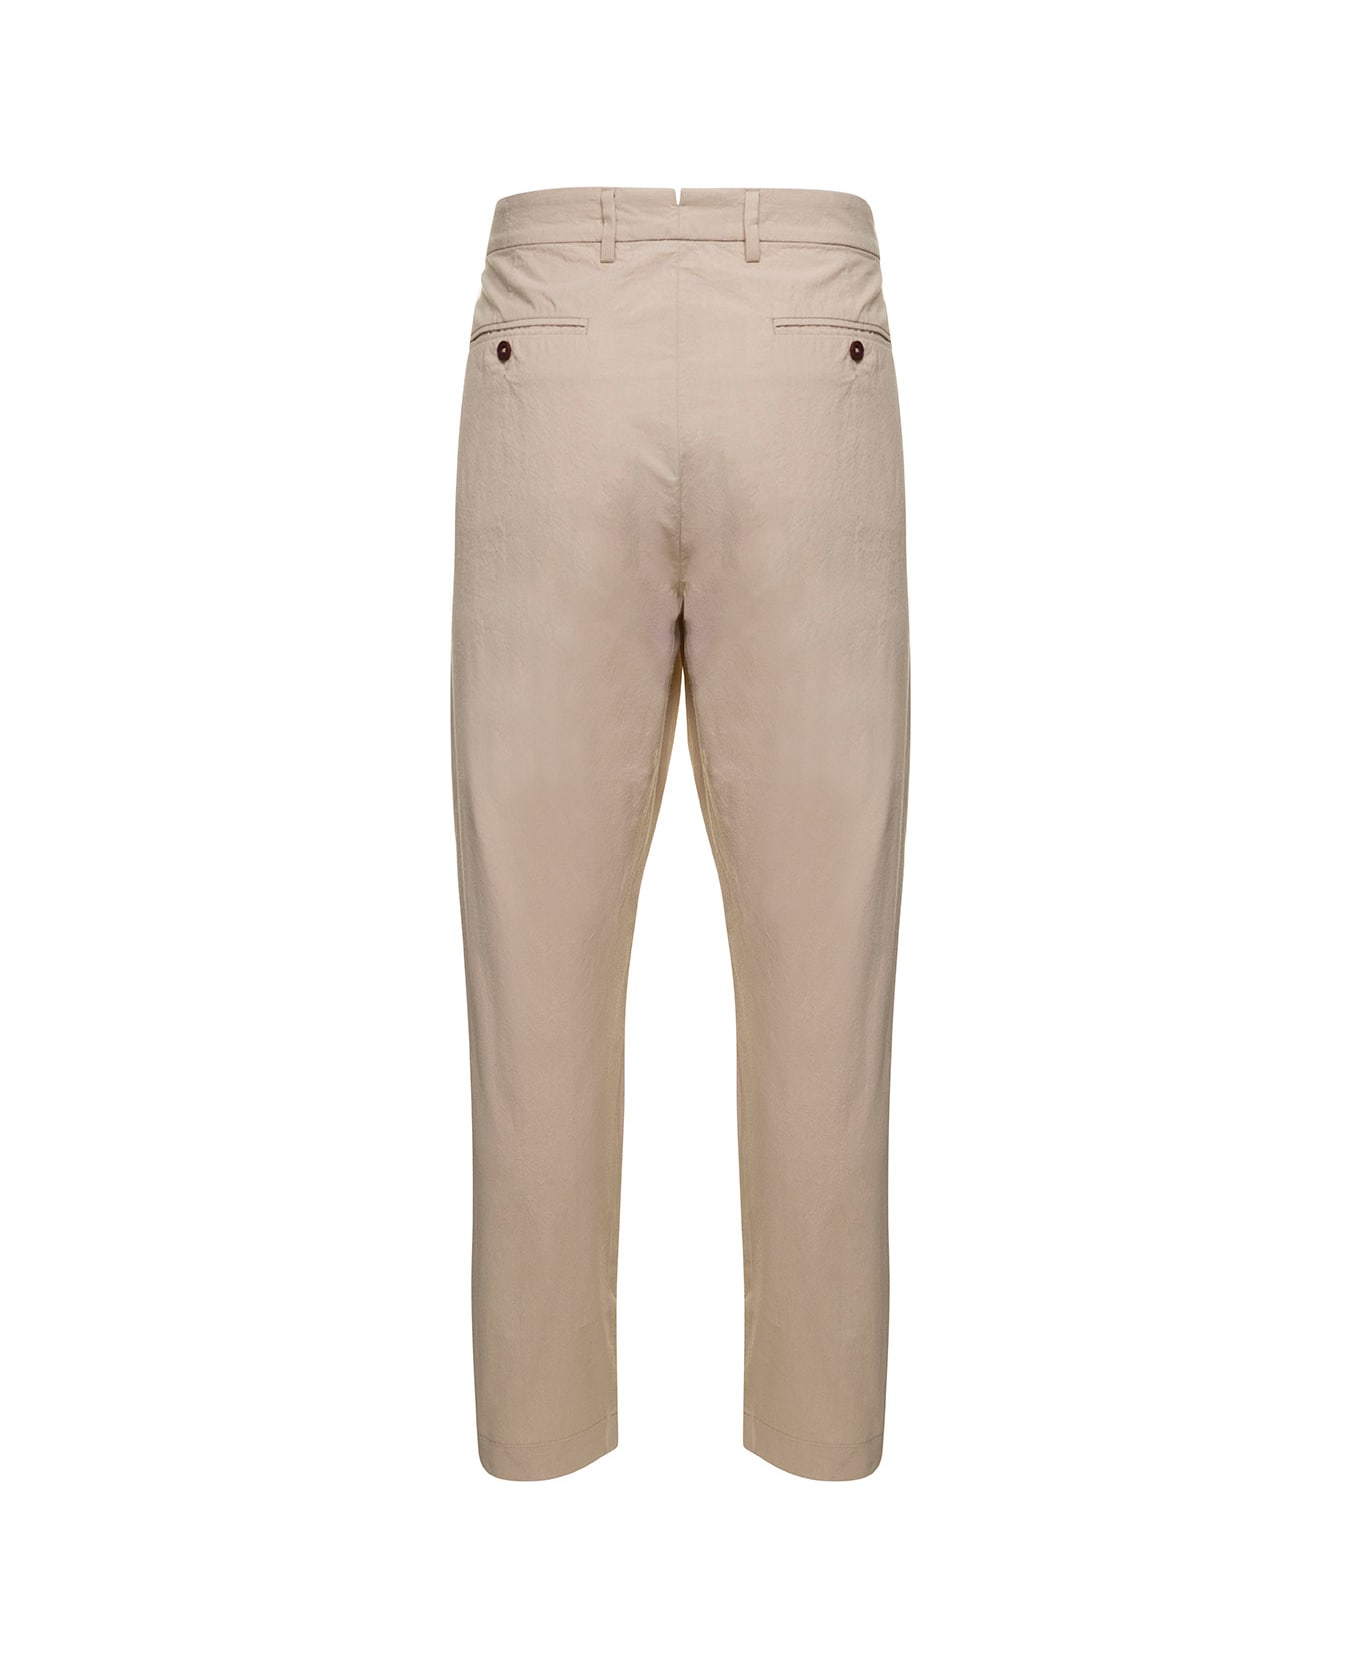 Pence Beige Pants With Button Fastening In Cotton Man - Beige